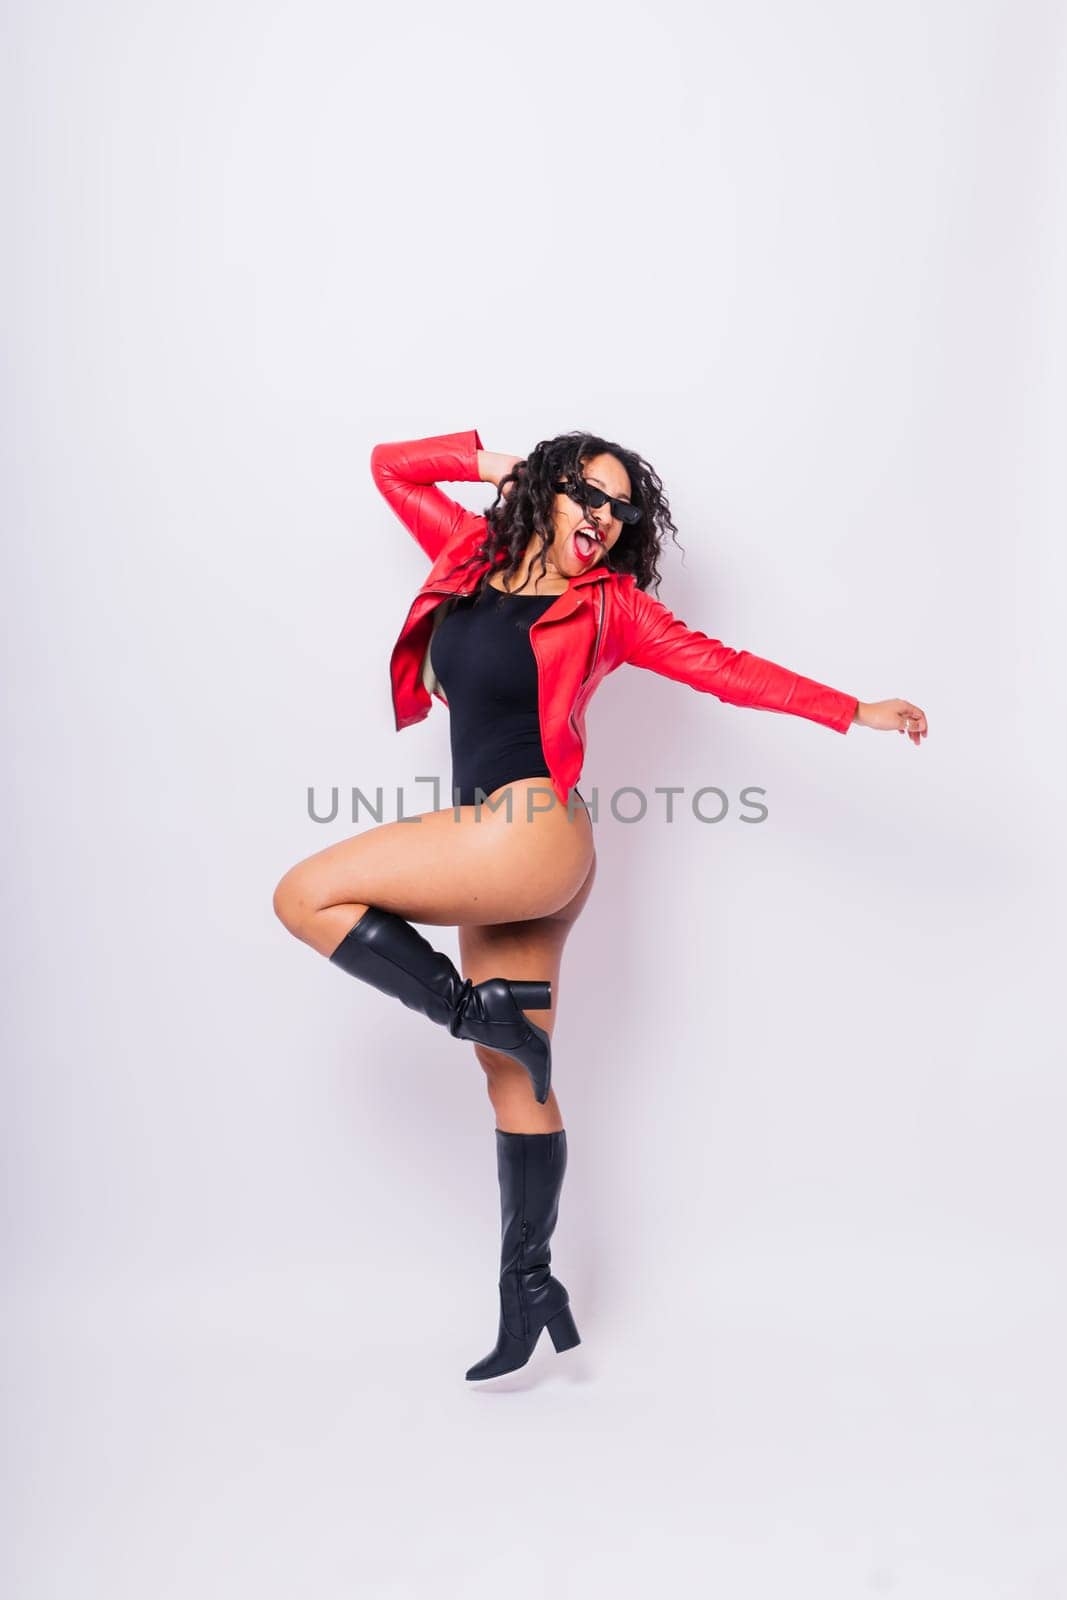 Seductive african woman posing in a black bodysuit and jacket in studio. Fit sporty female.